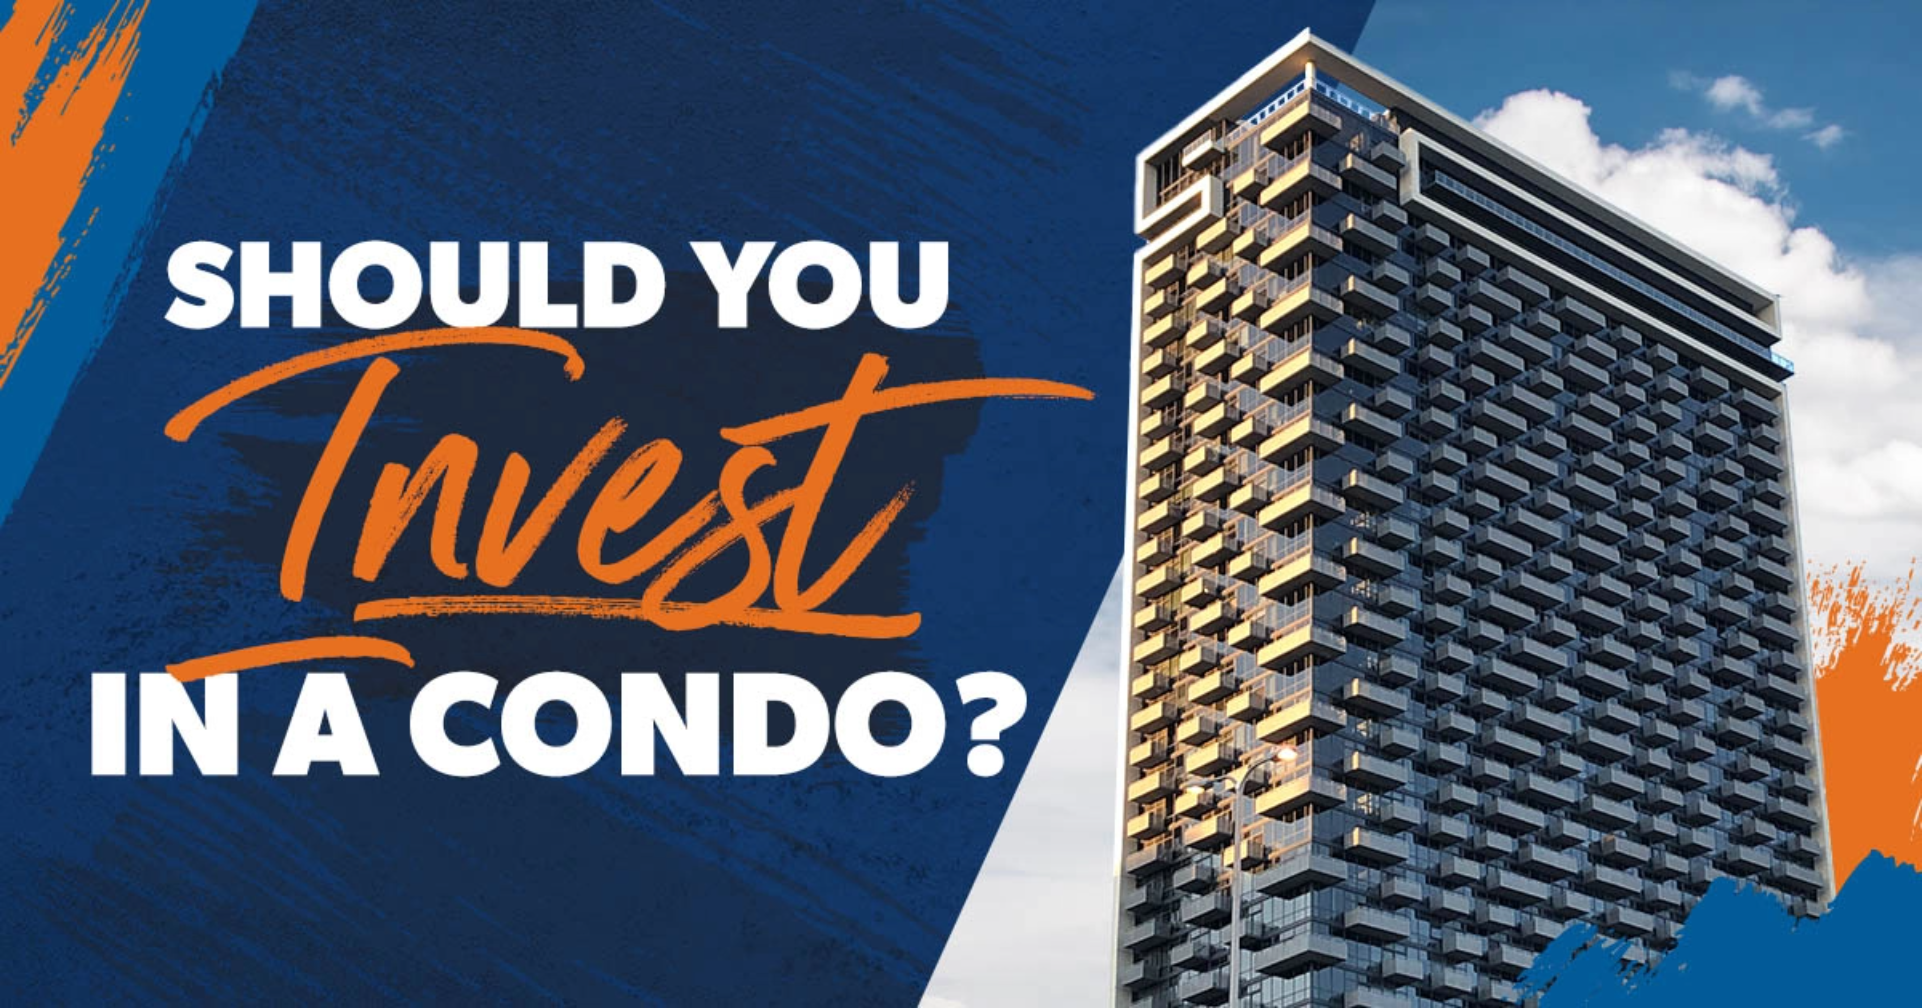 Should You Invest in a Condo blog header